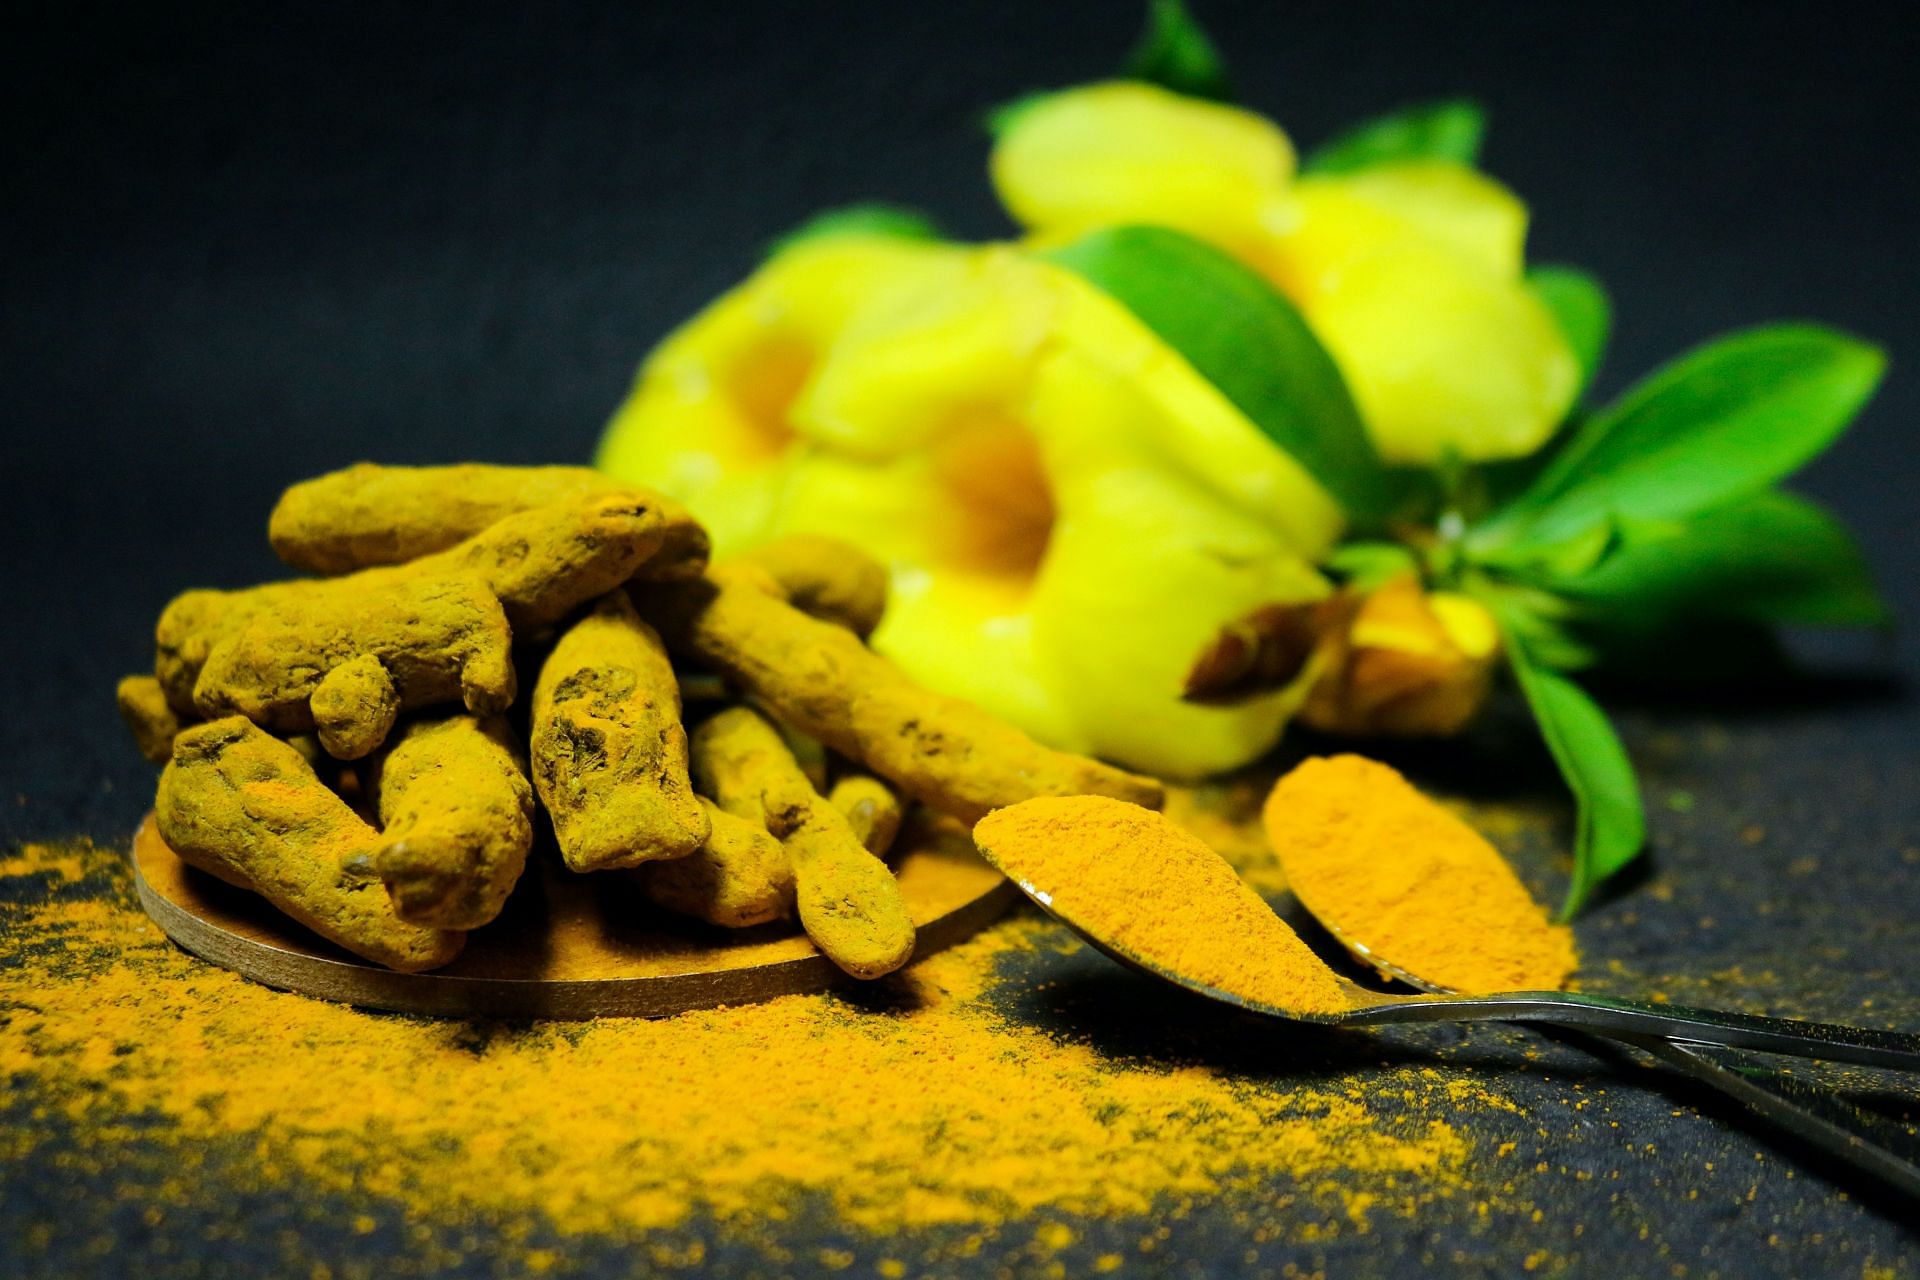 Golden milk made from turmeric can be one of the coffee alternatives (Image via Pexels)